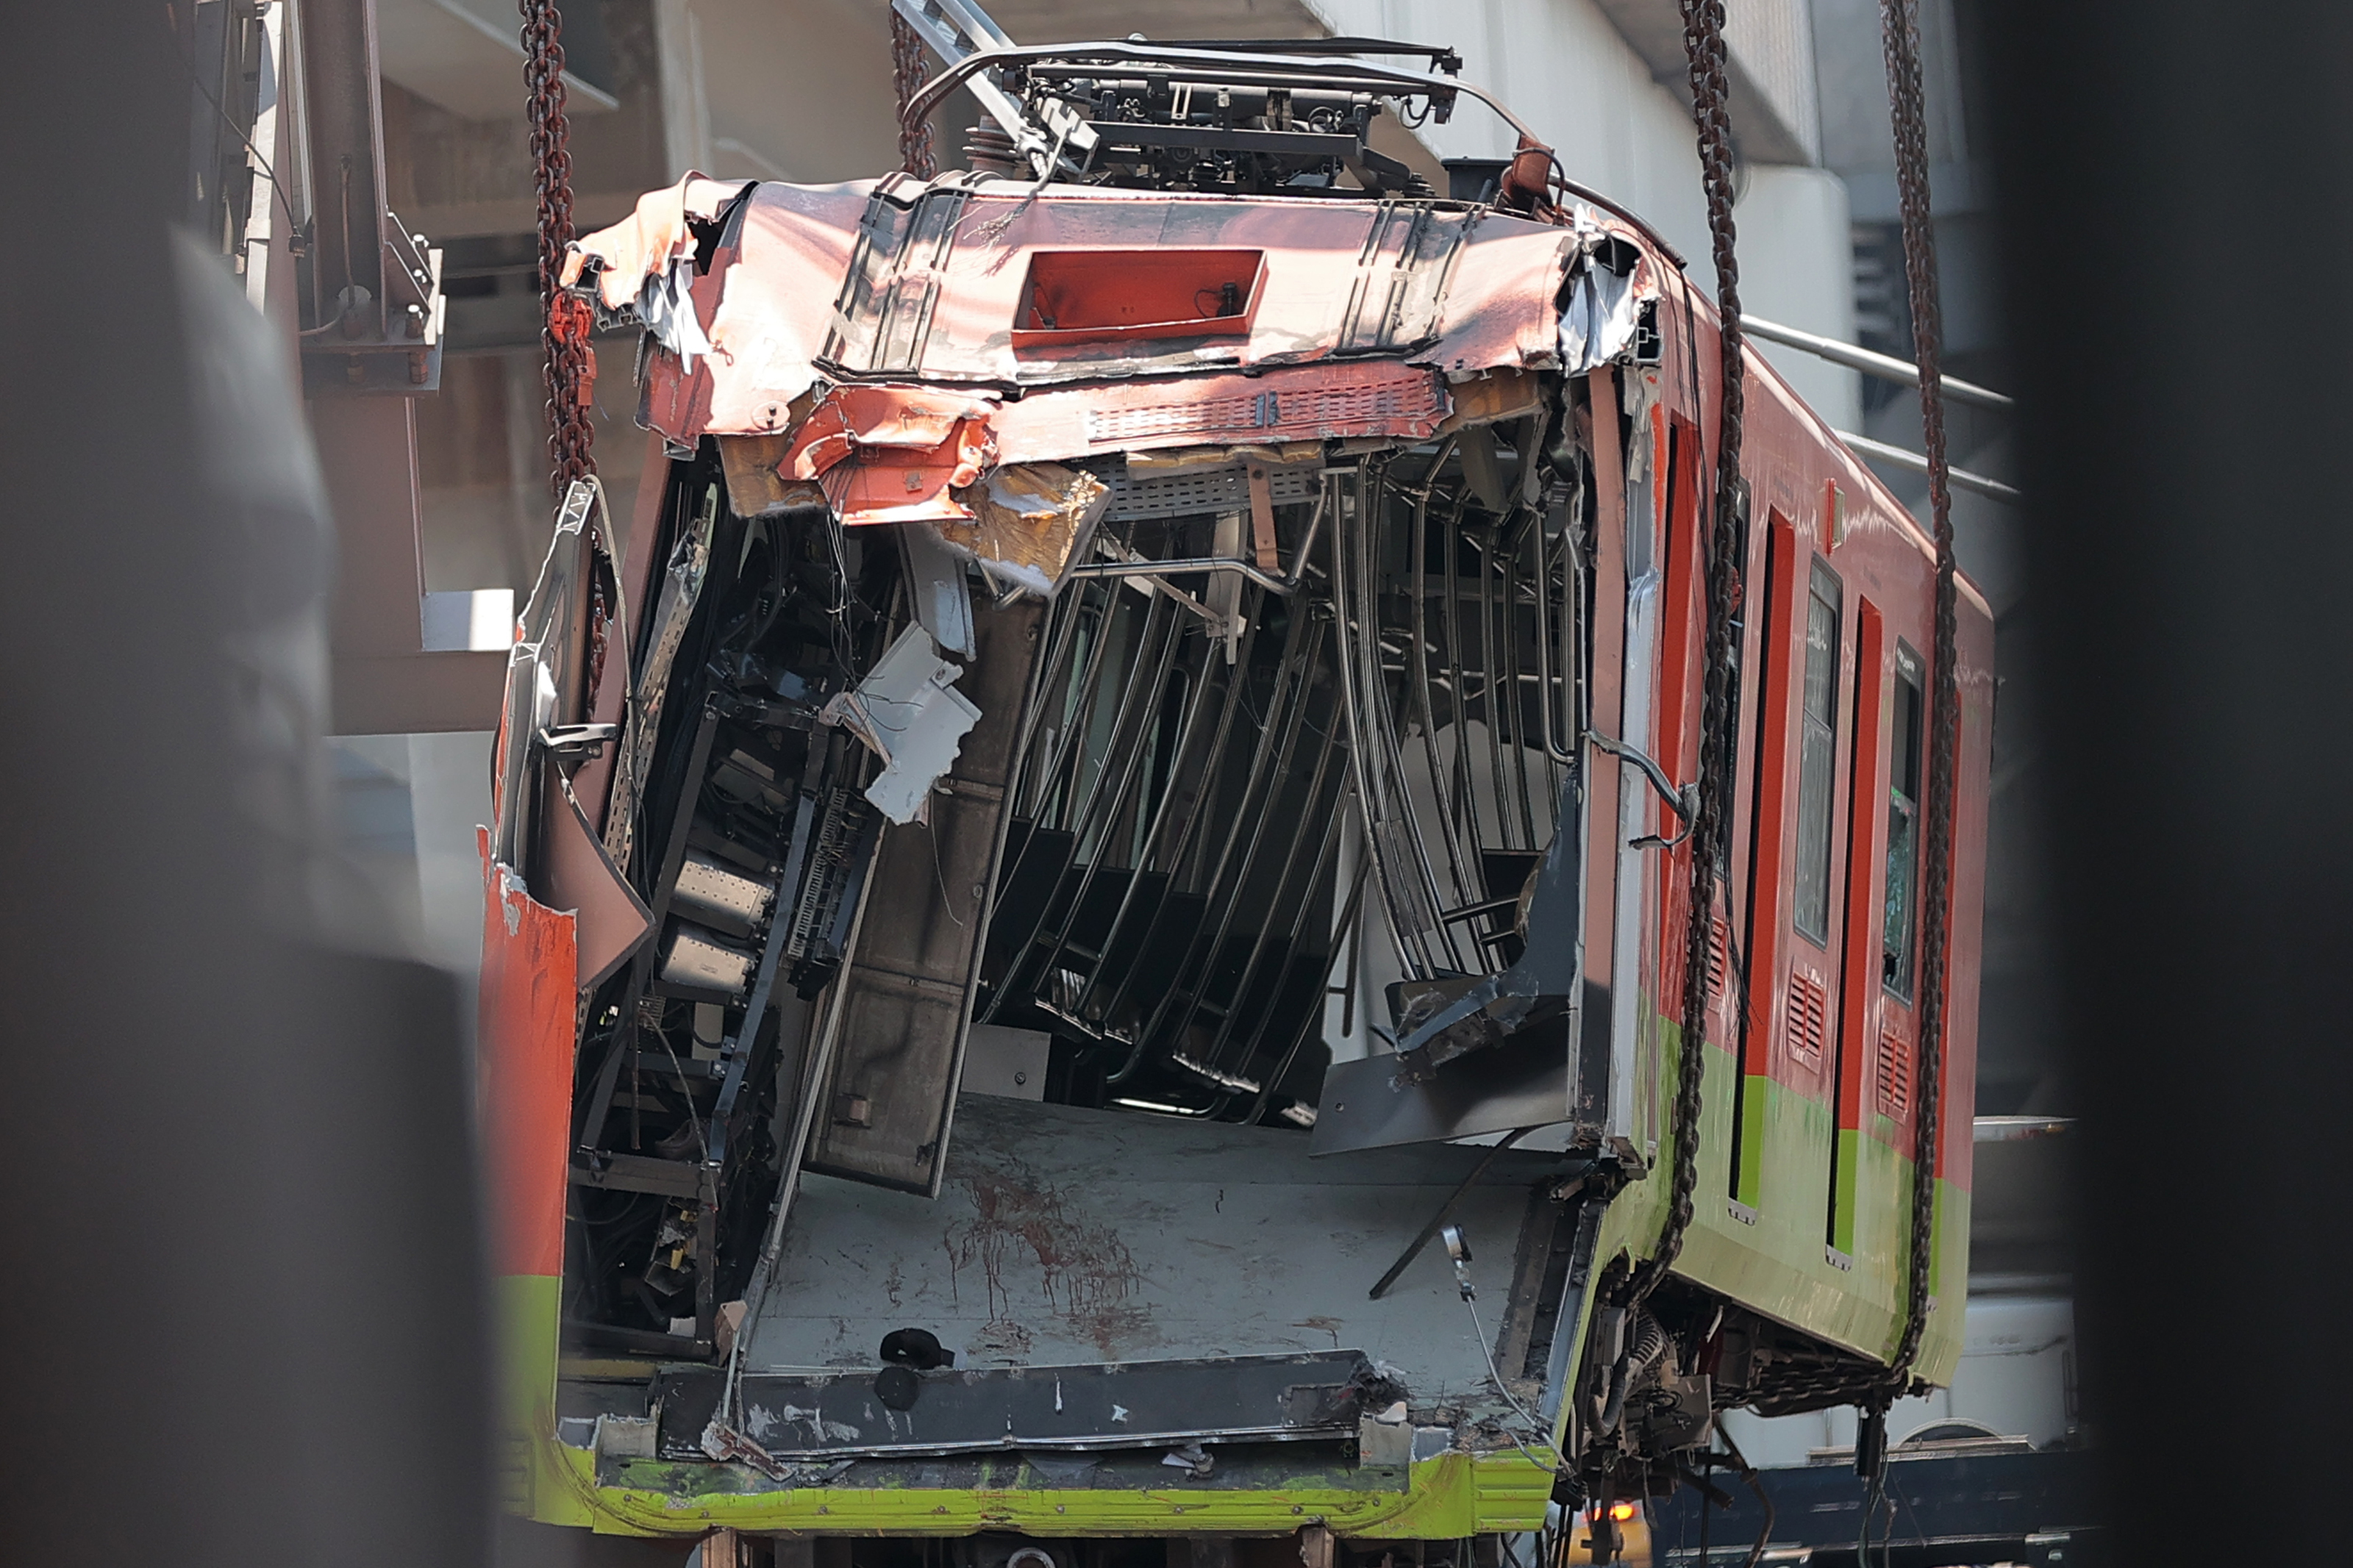 View of a crashed train carriage after a train overpass collapsed last night killing 23 people in Mexico City, Mexico.